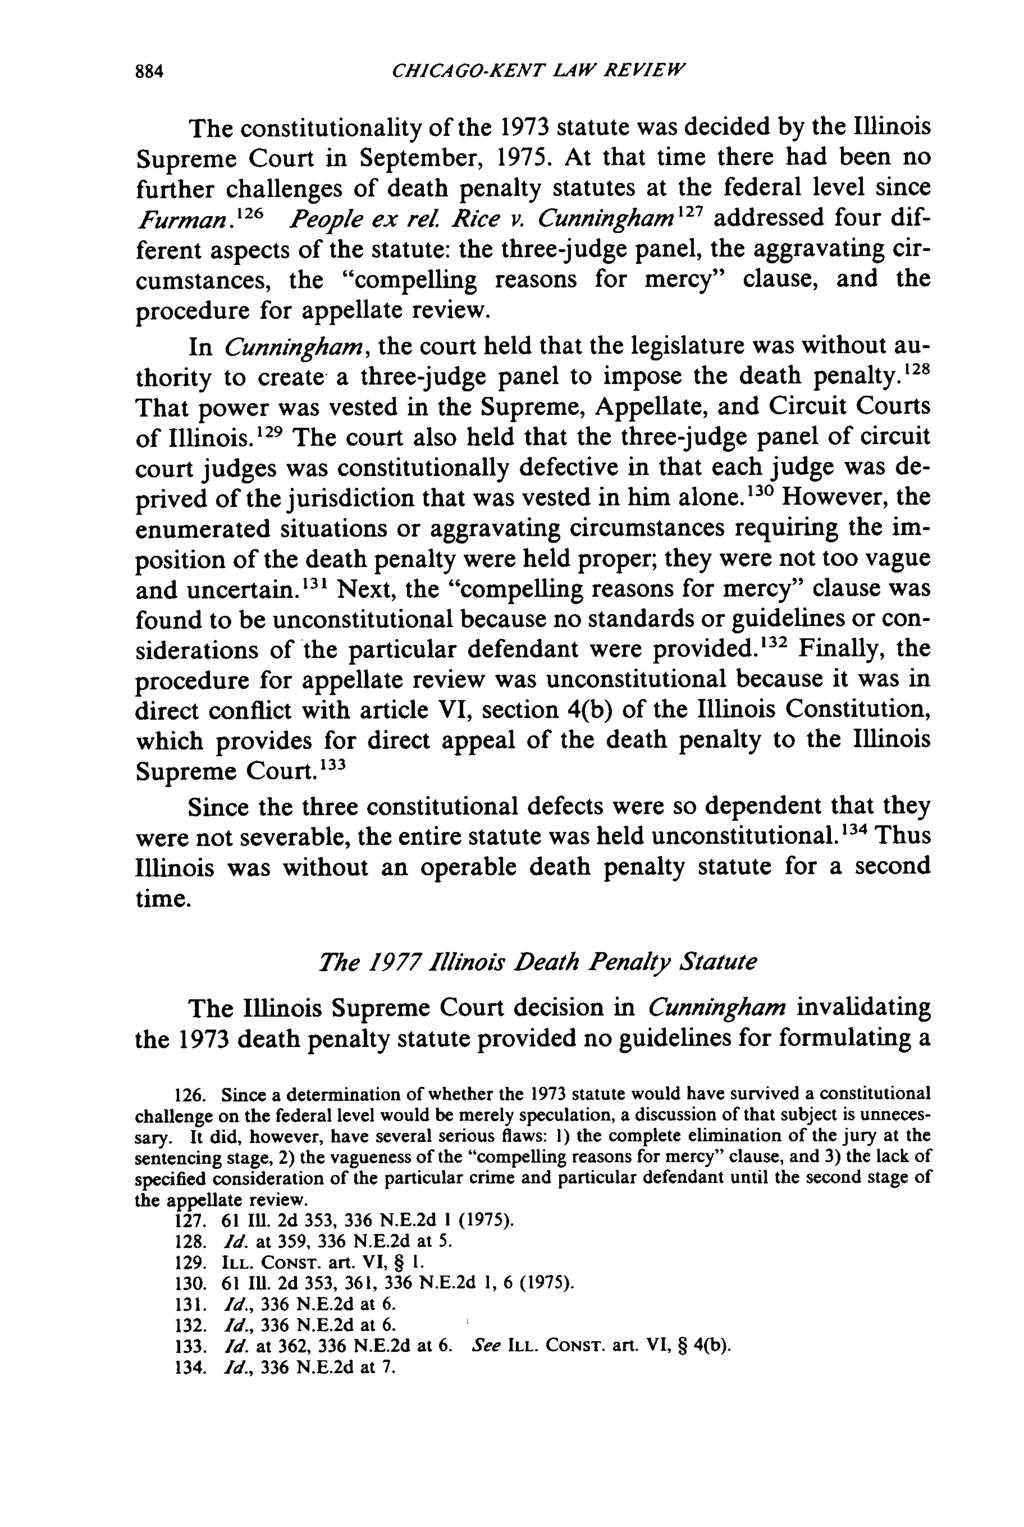 CHICAGO-KENT LAW REVIEW The constitutionality of the 1973 statute was decided by the Illinois Supreme Court in September, 1975.